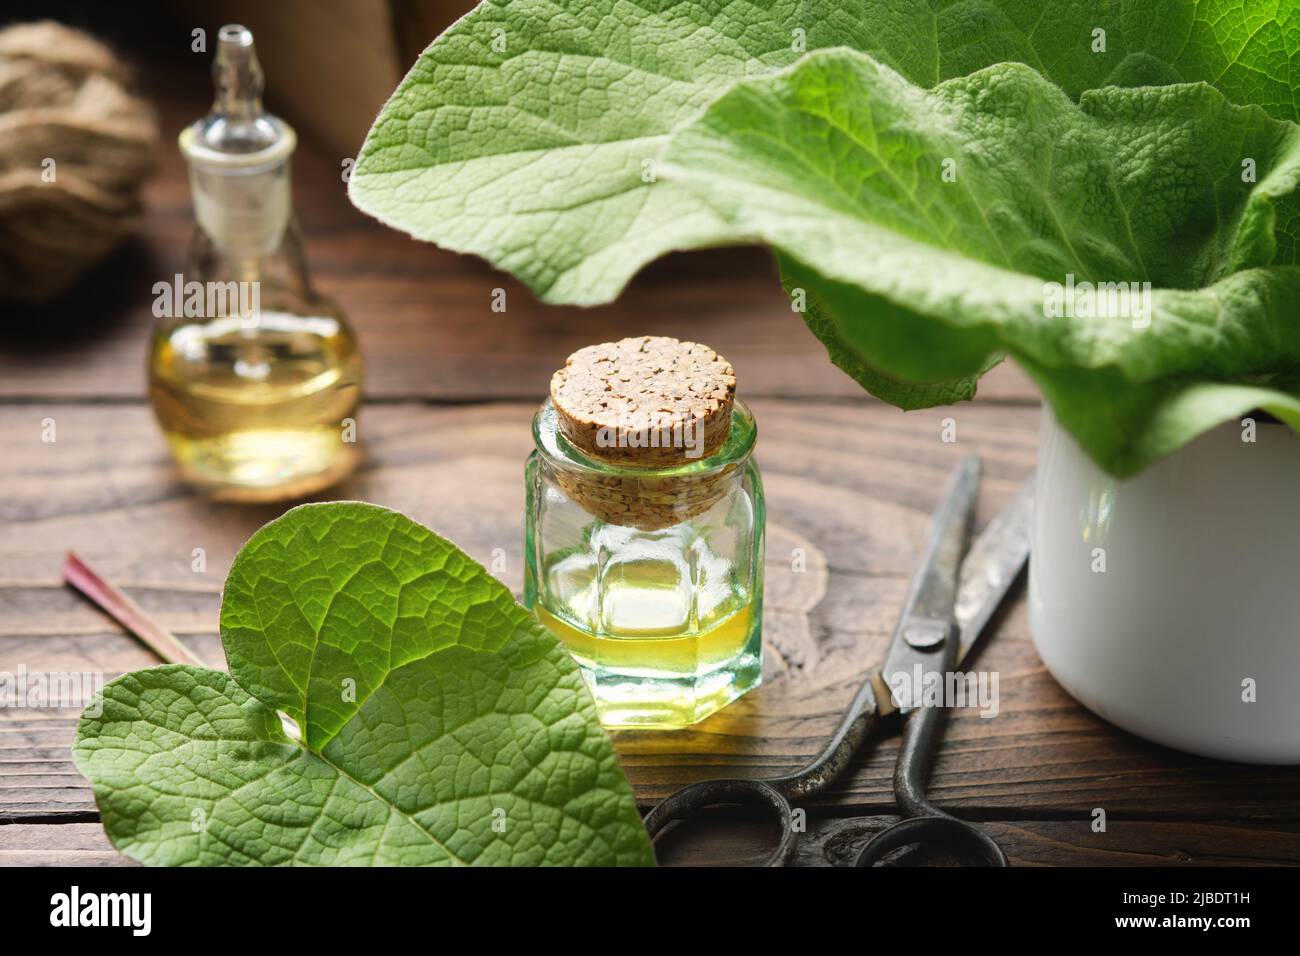 Bottles of Burr oil and Burdock infusion or tincture. Leaves of arctium lappa - latin name for Burdock. Alternative herbal medicine. Hair care. Stock Photo